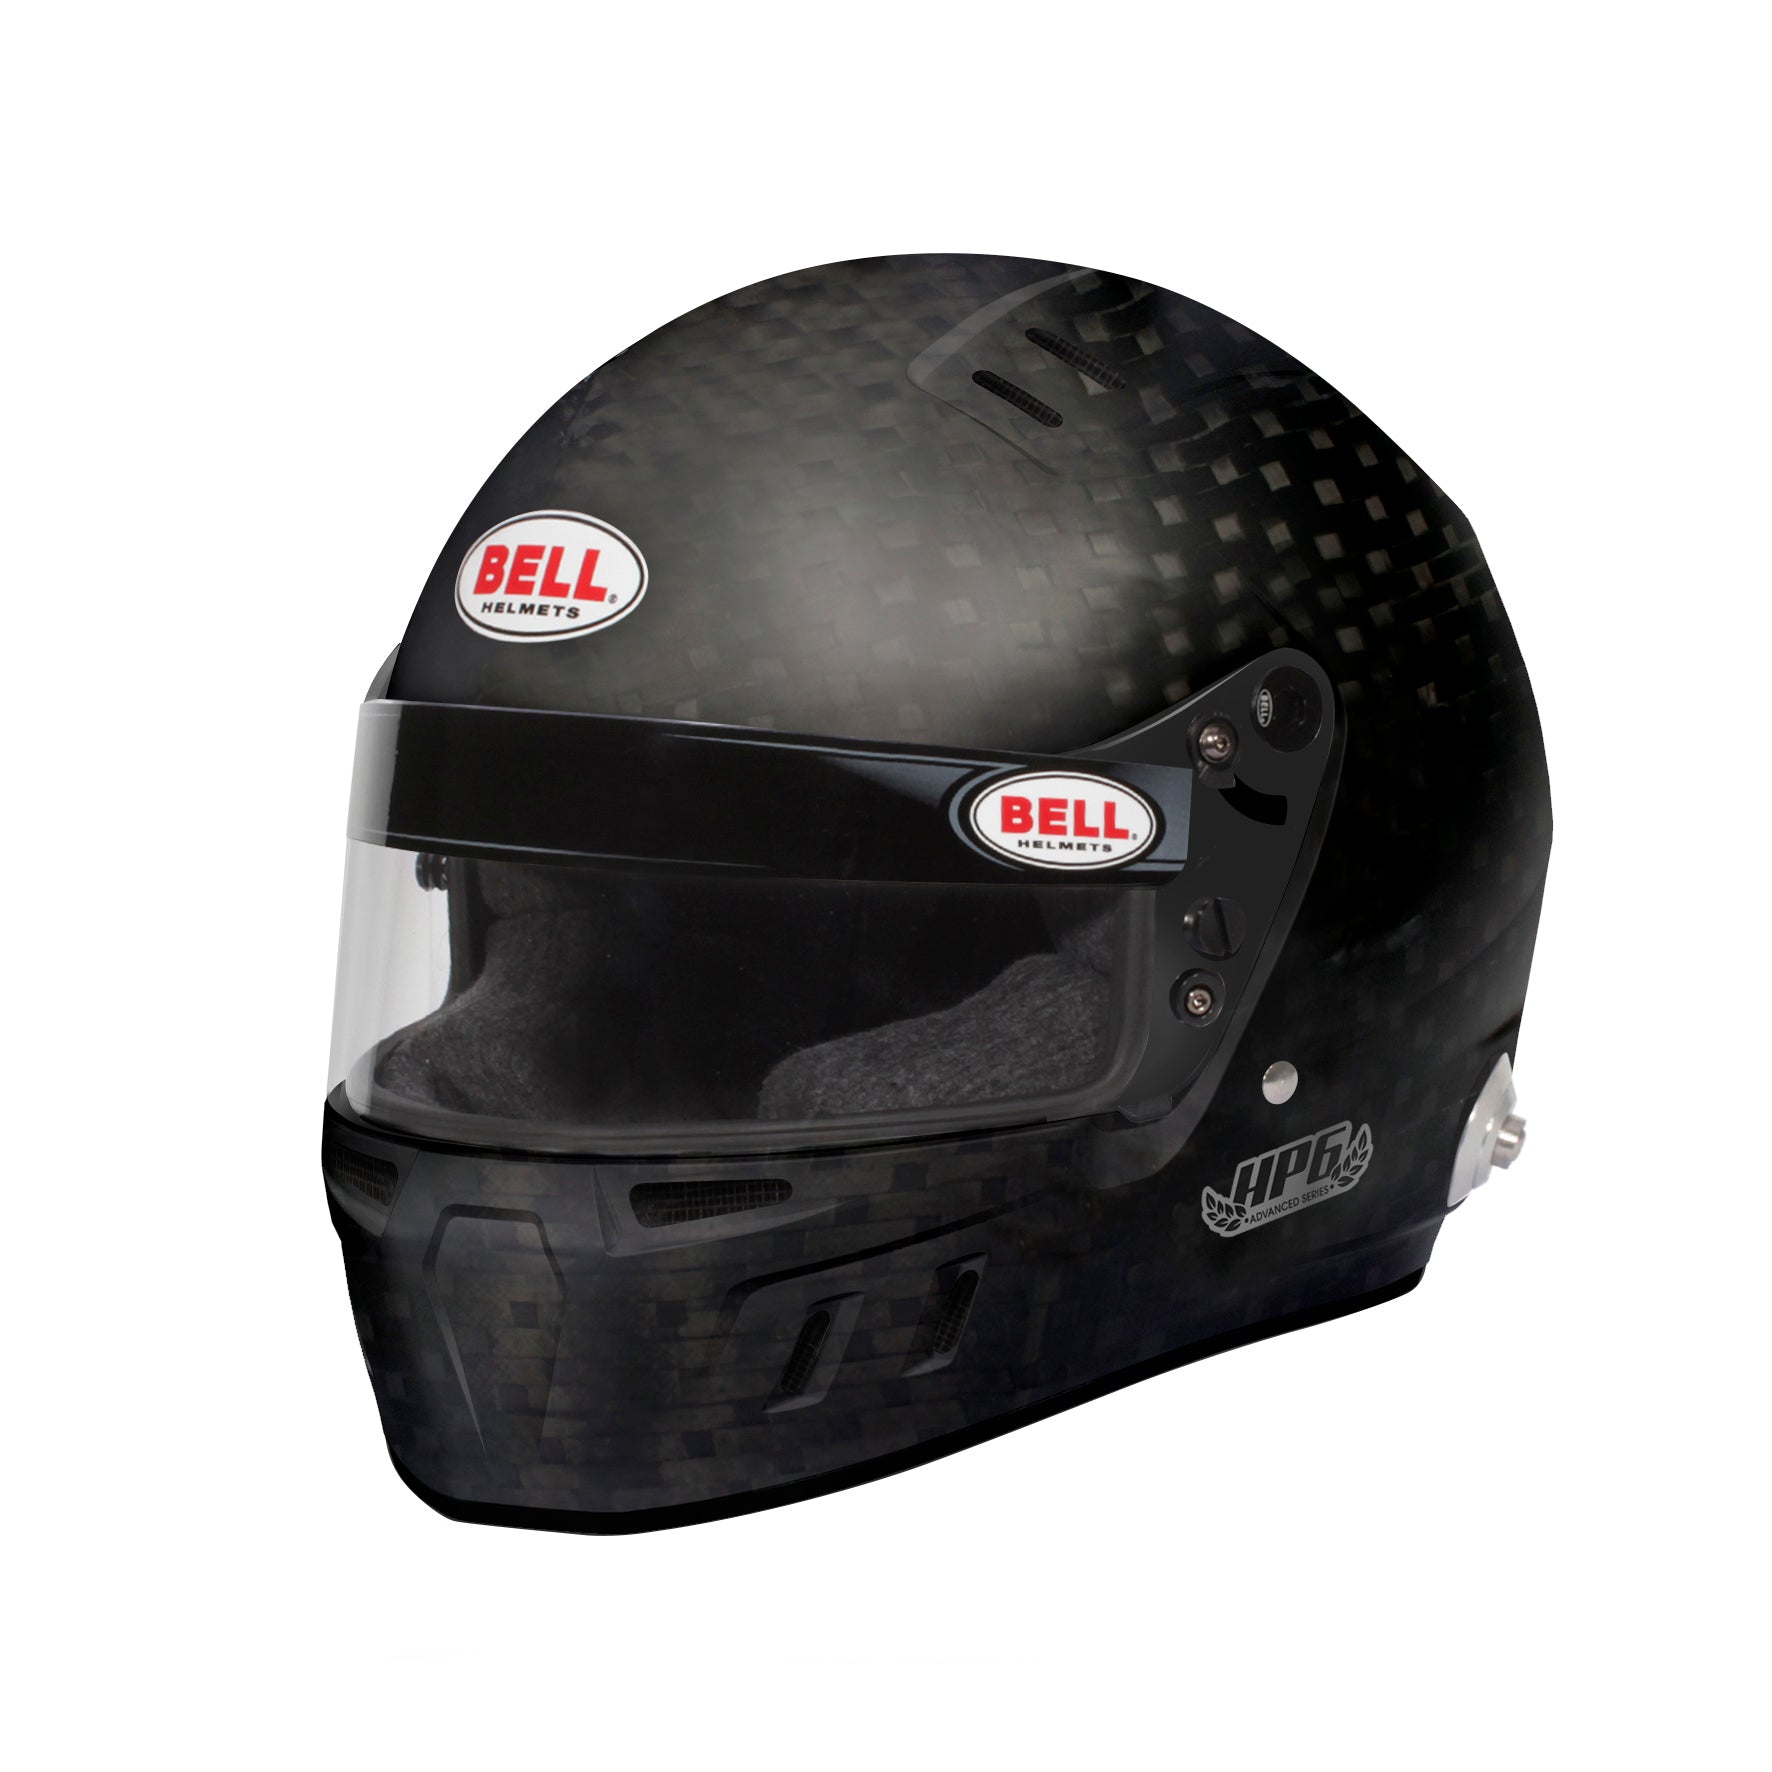 BELL 1140009 HP6 Racing helmet full-face, HANS, FIA8860-2018, carbon, size 61+ (7 5/8 +) Photo-0 